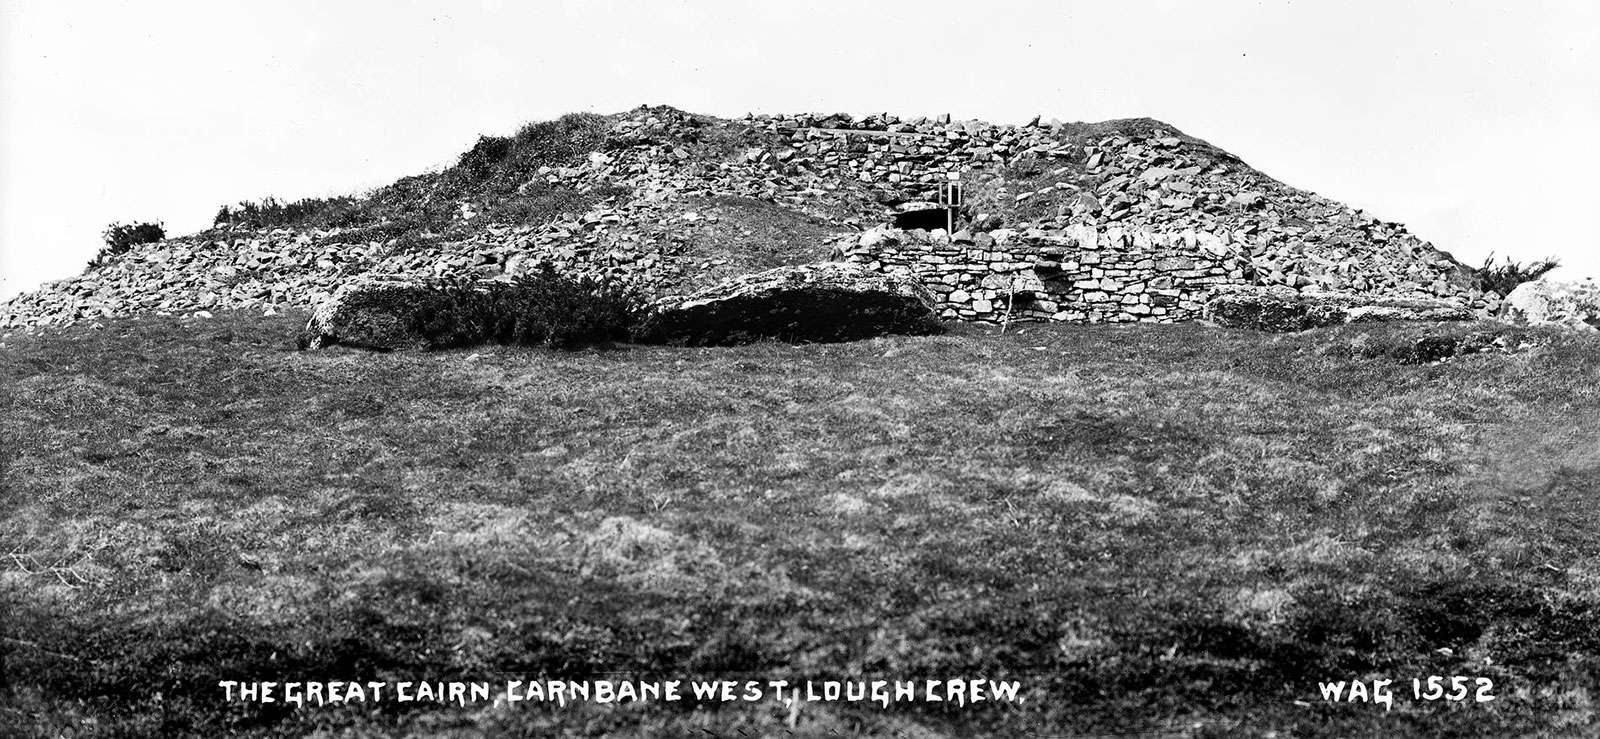 Cairn L photographed by William Green.